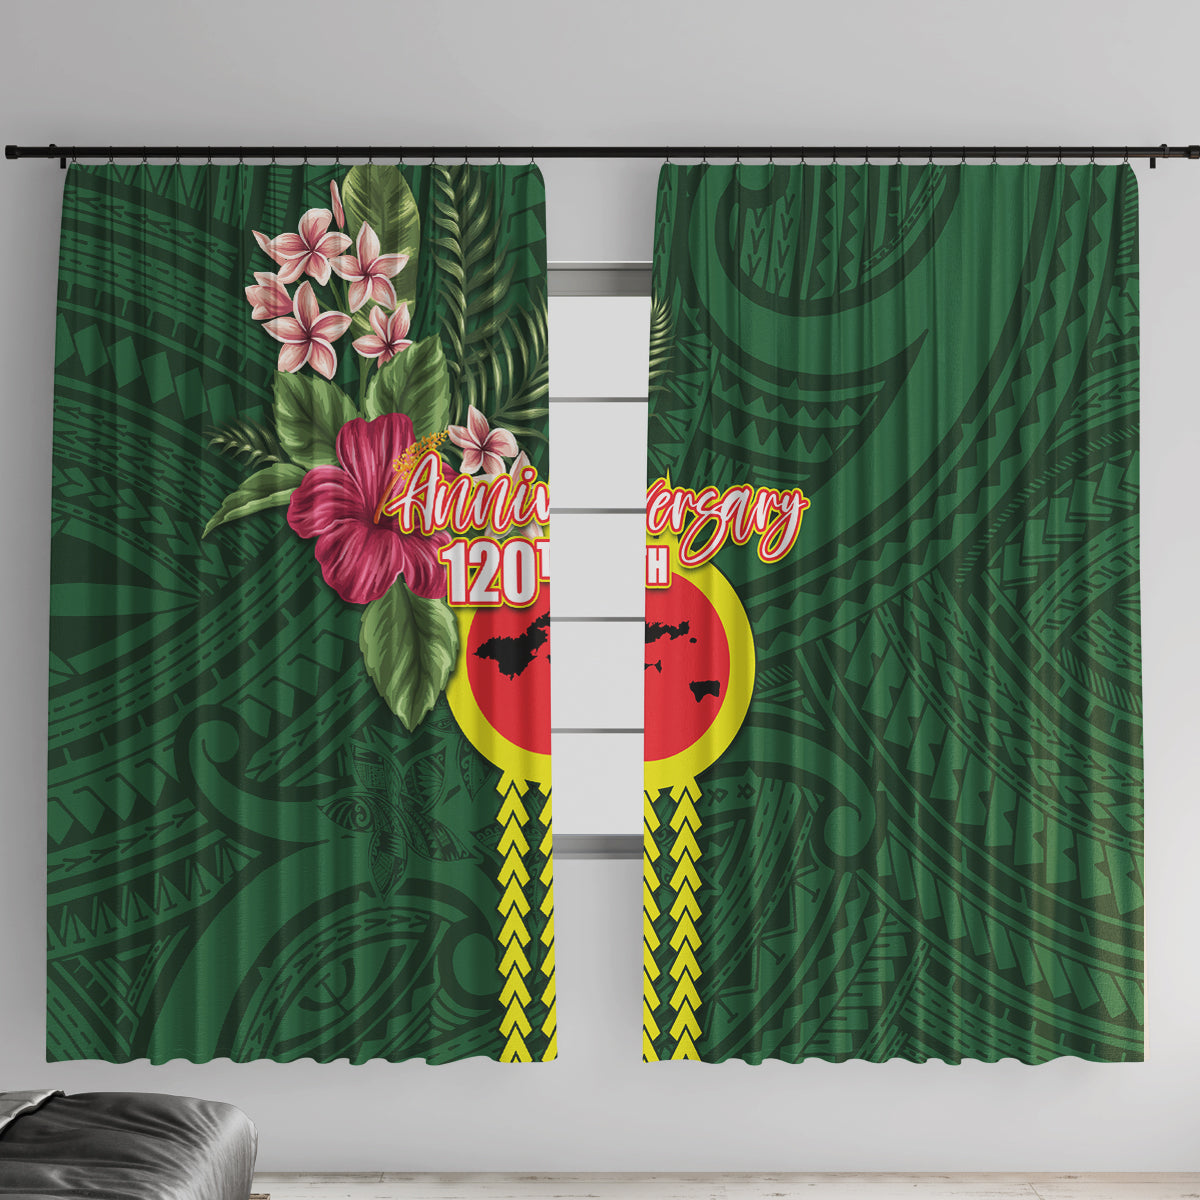 Manu'a Cession Day 120th Anniversary Window Curtain Polynesian Pattern and Hibiscus Flower